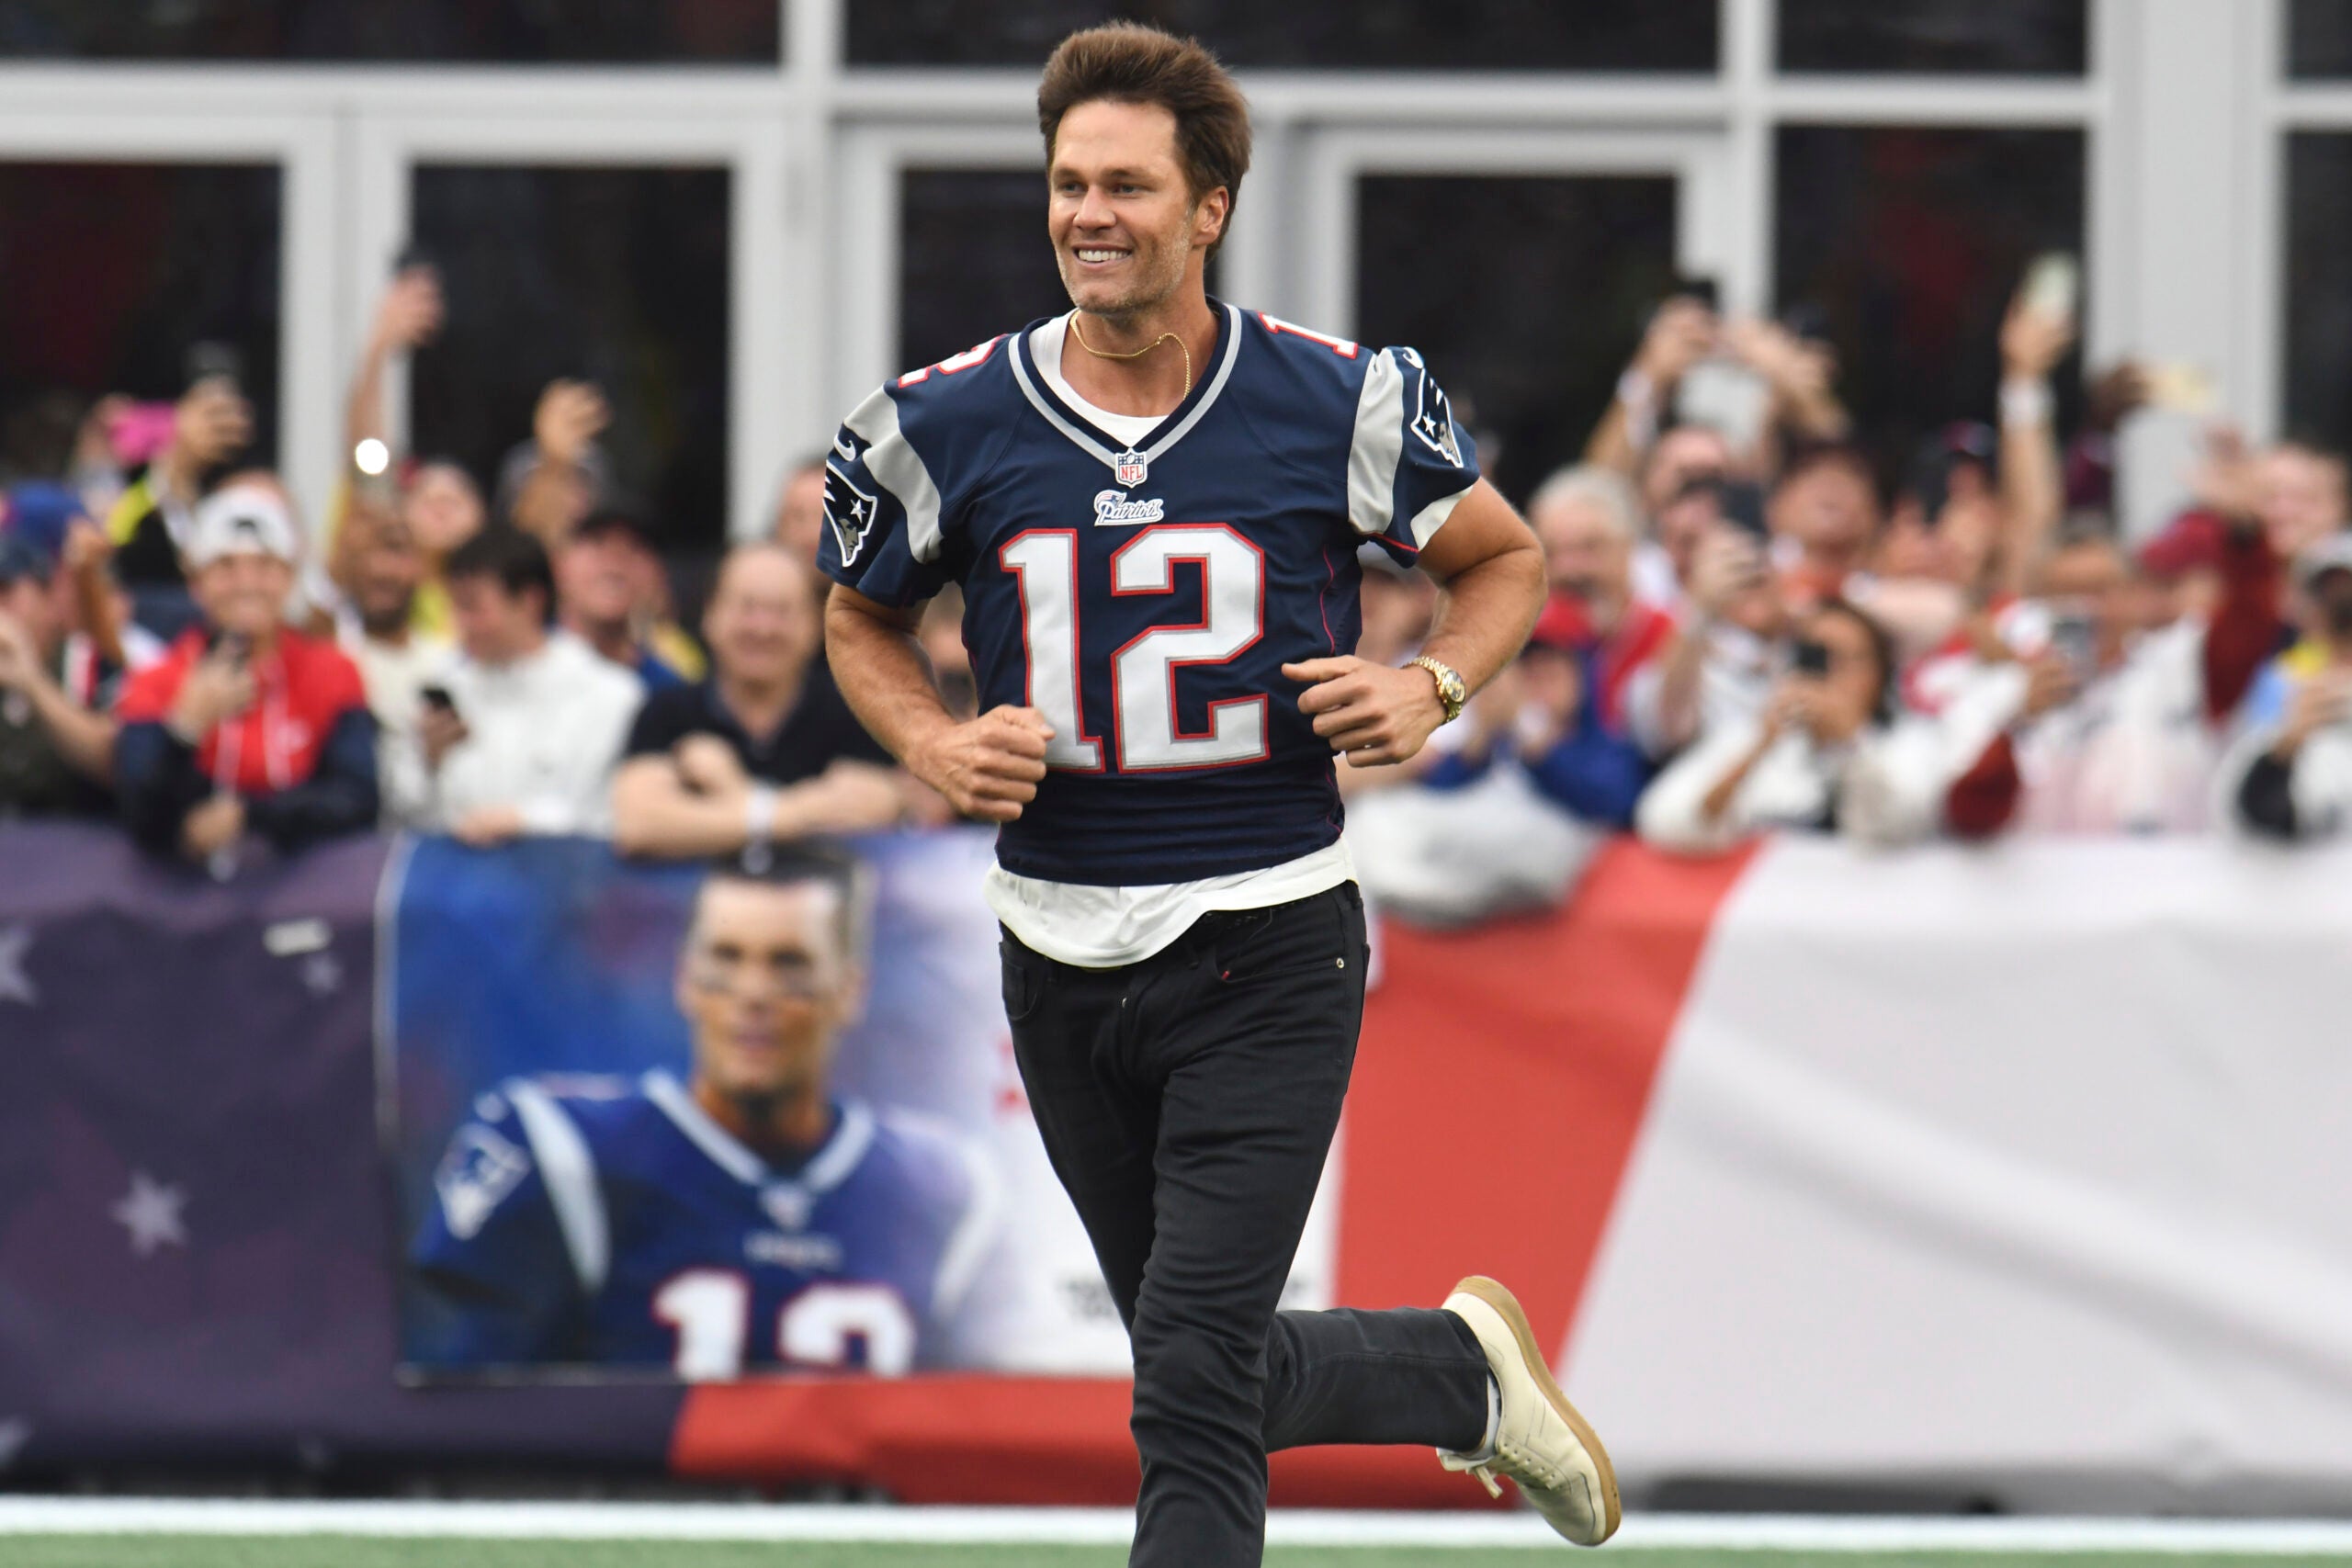 Former New England Patriots quarterback Tom Brady runs on the field during halftime ceremonies held to honor him.